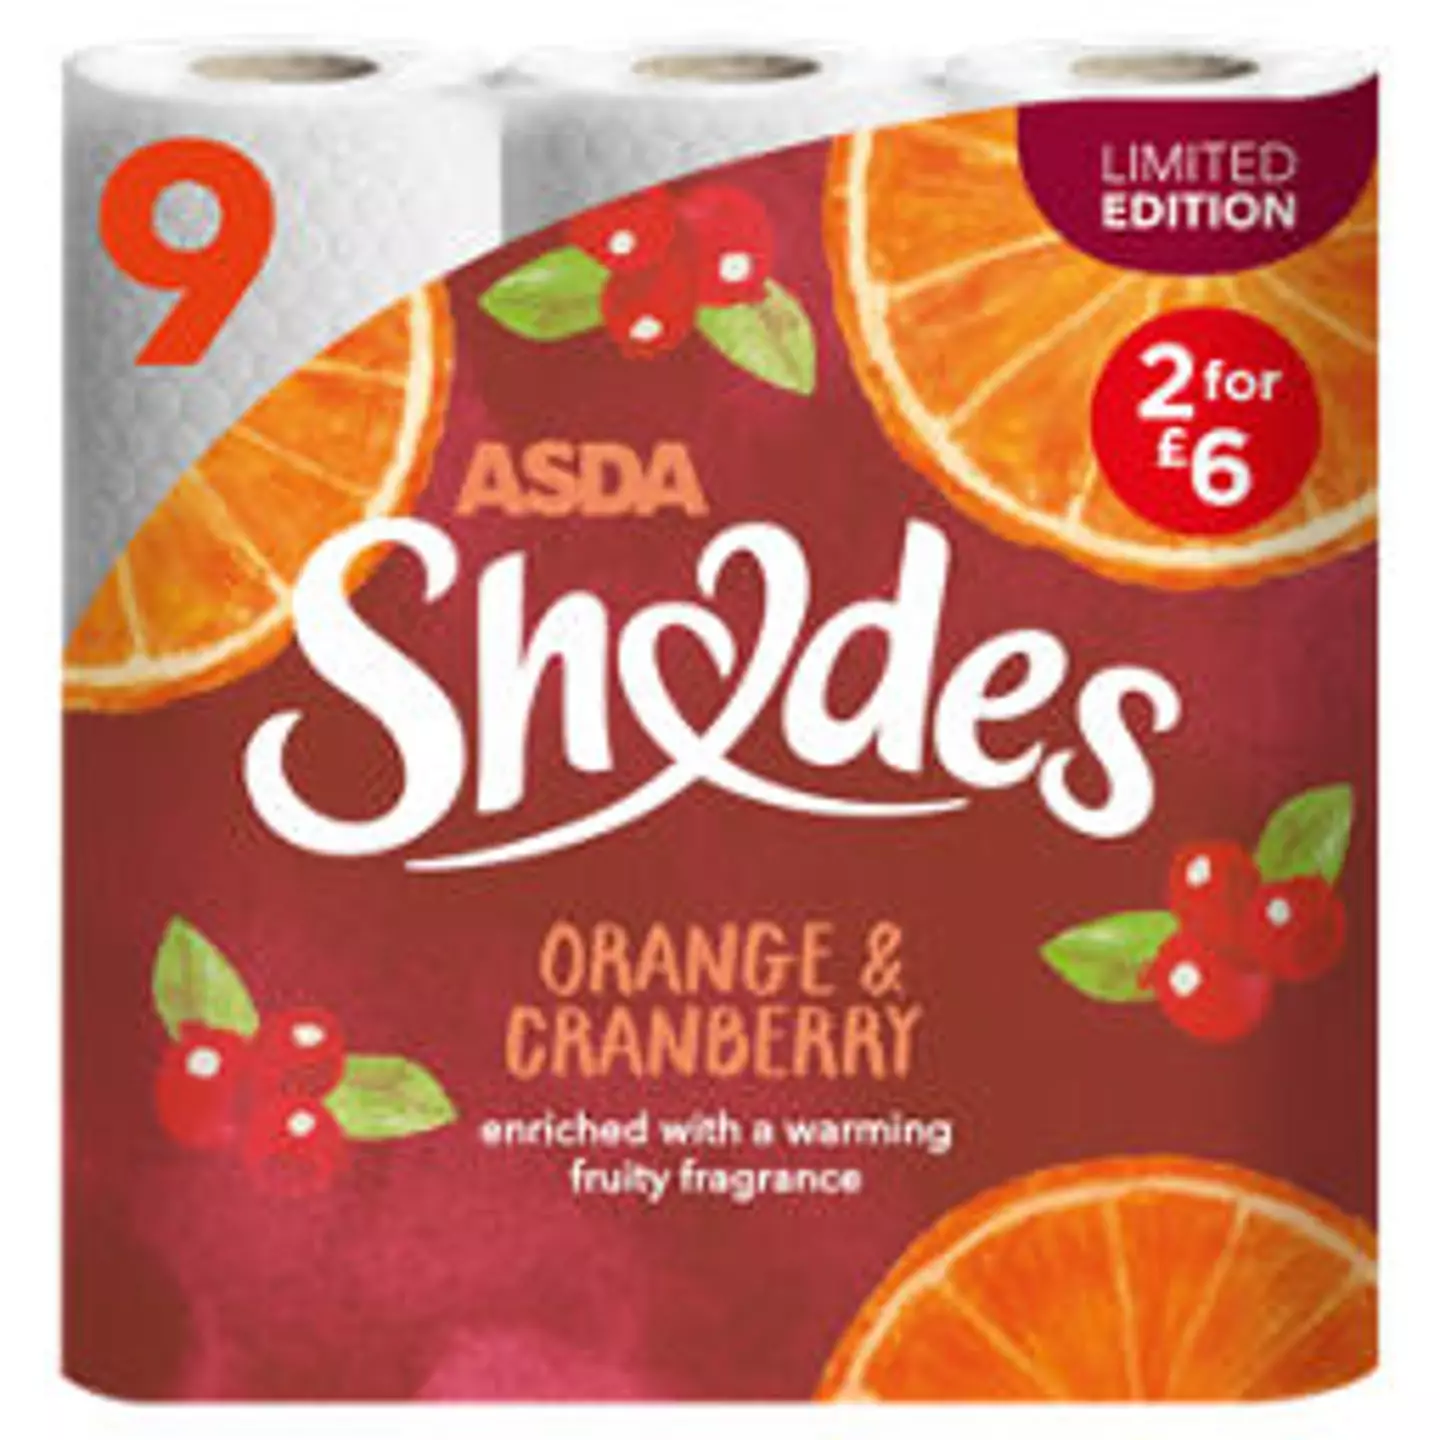 The toilet roll is scented with orange and cranberry (